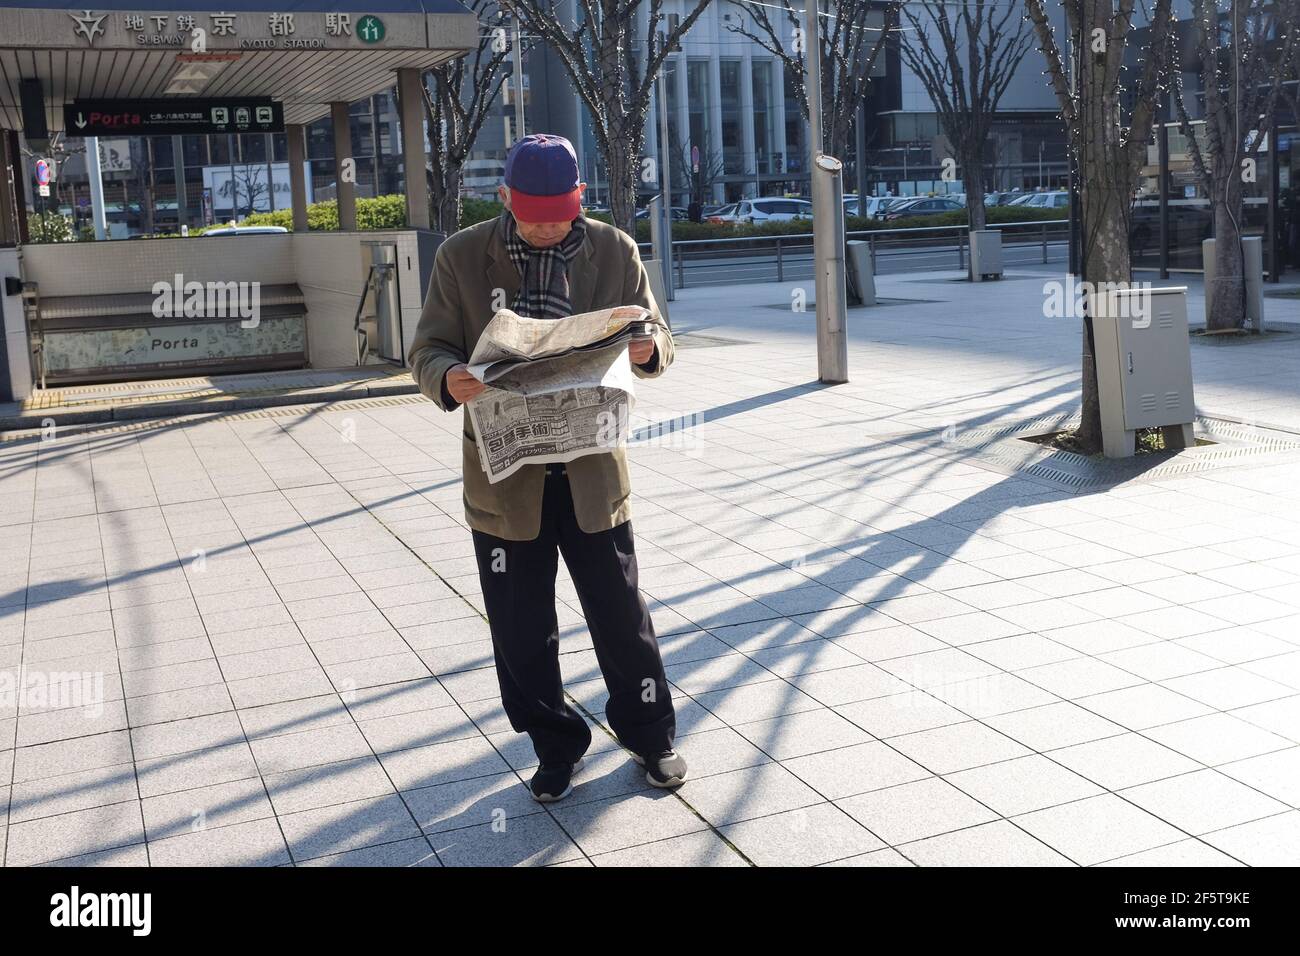 A man reading a newspaper on a street in Kyoto, Japan. Stock Photo